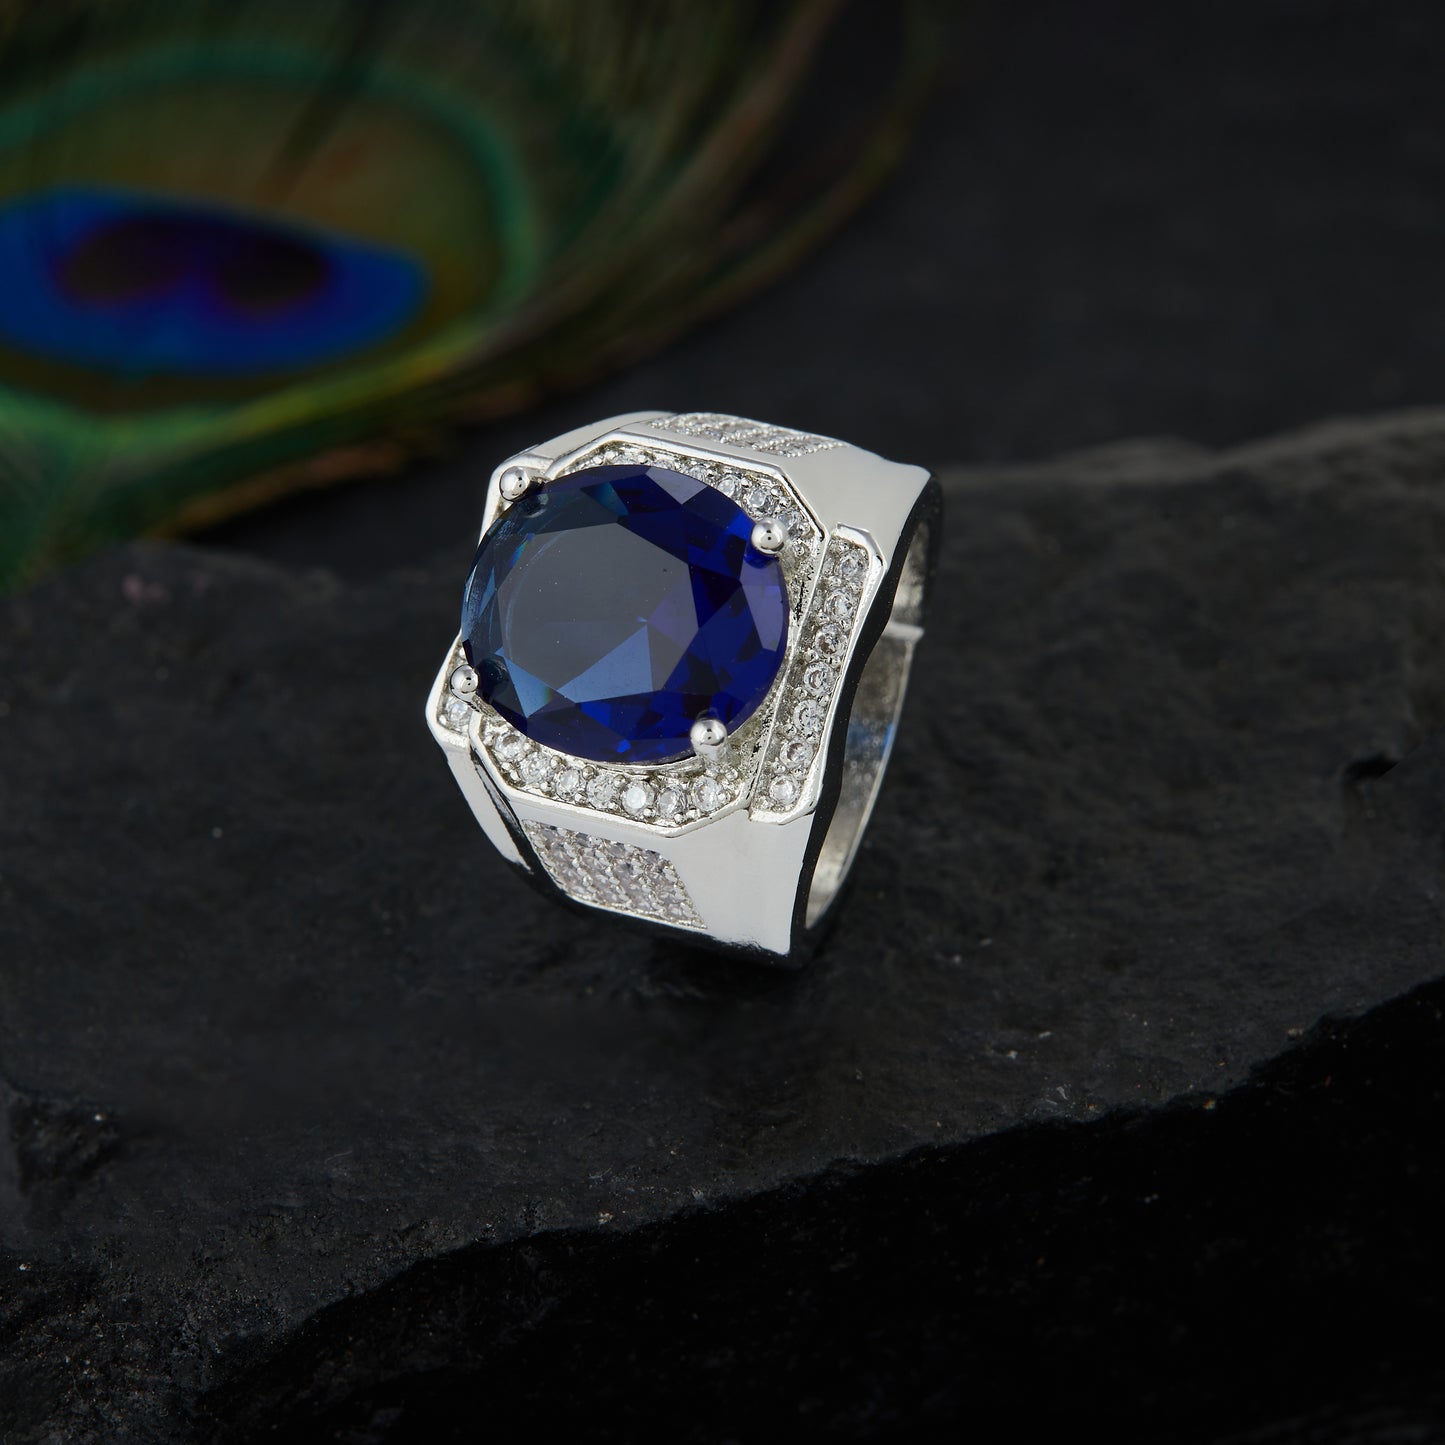 SILVER PLATED BLUE STONE ADJUSTABLE RING SPBSR006